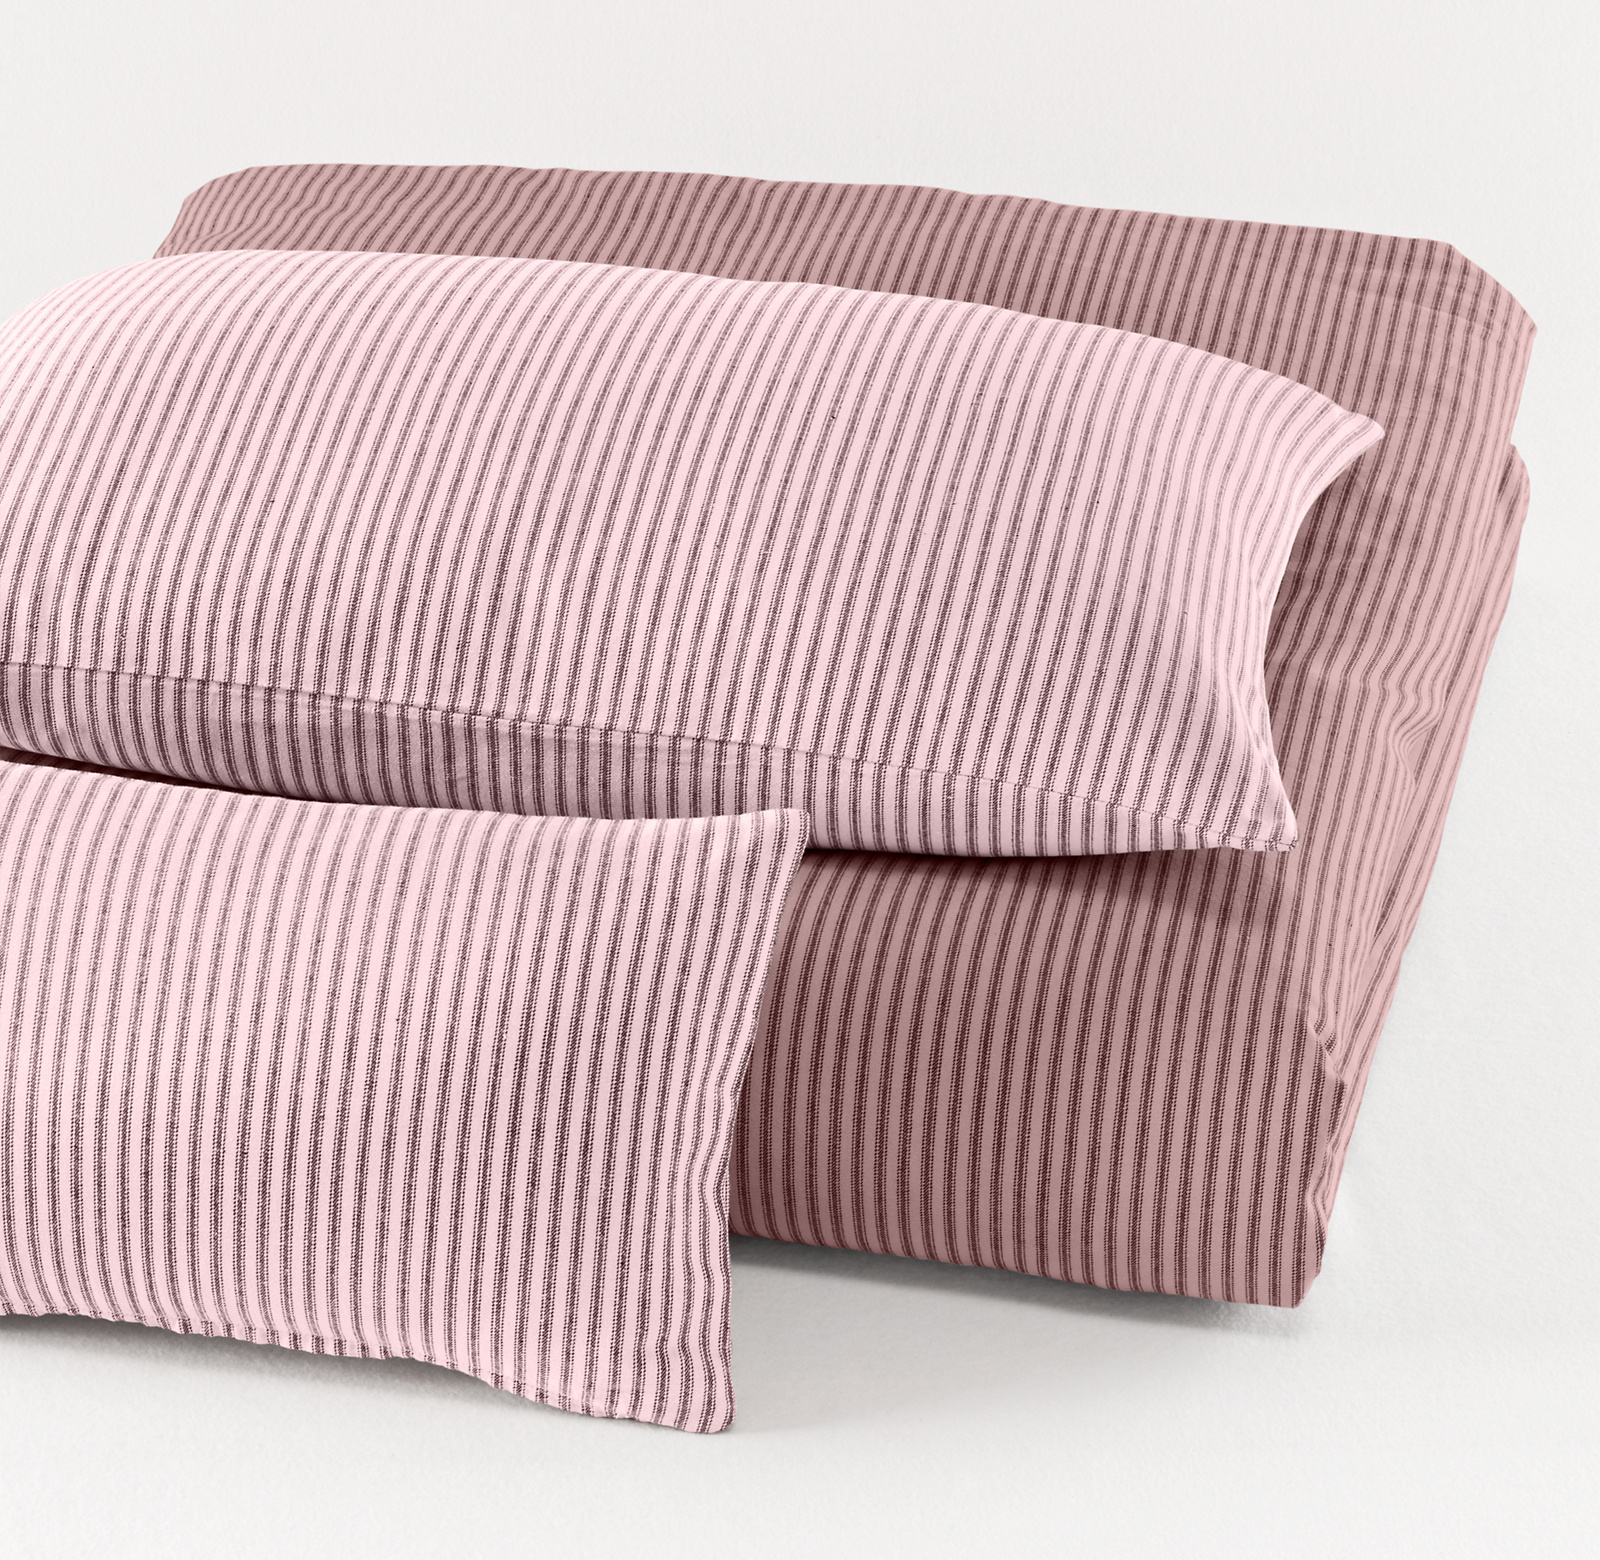 Duvet cover shown in dusty rose and shams shown in petal.